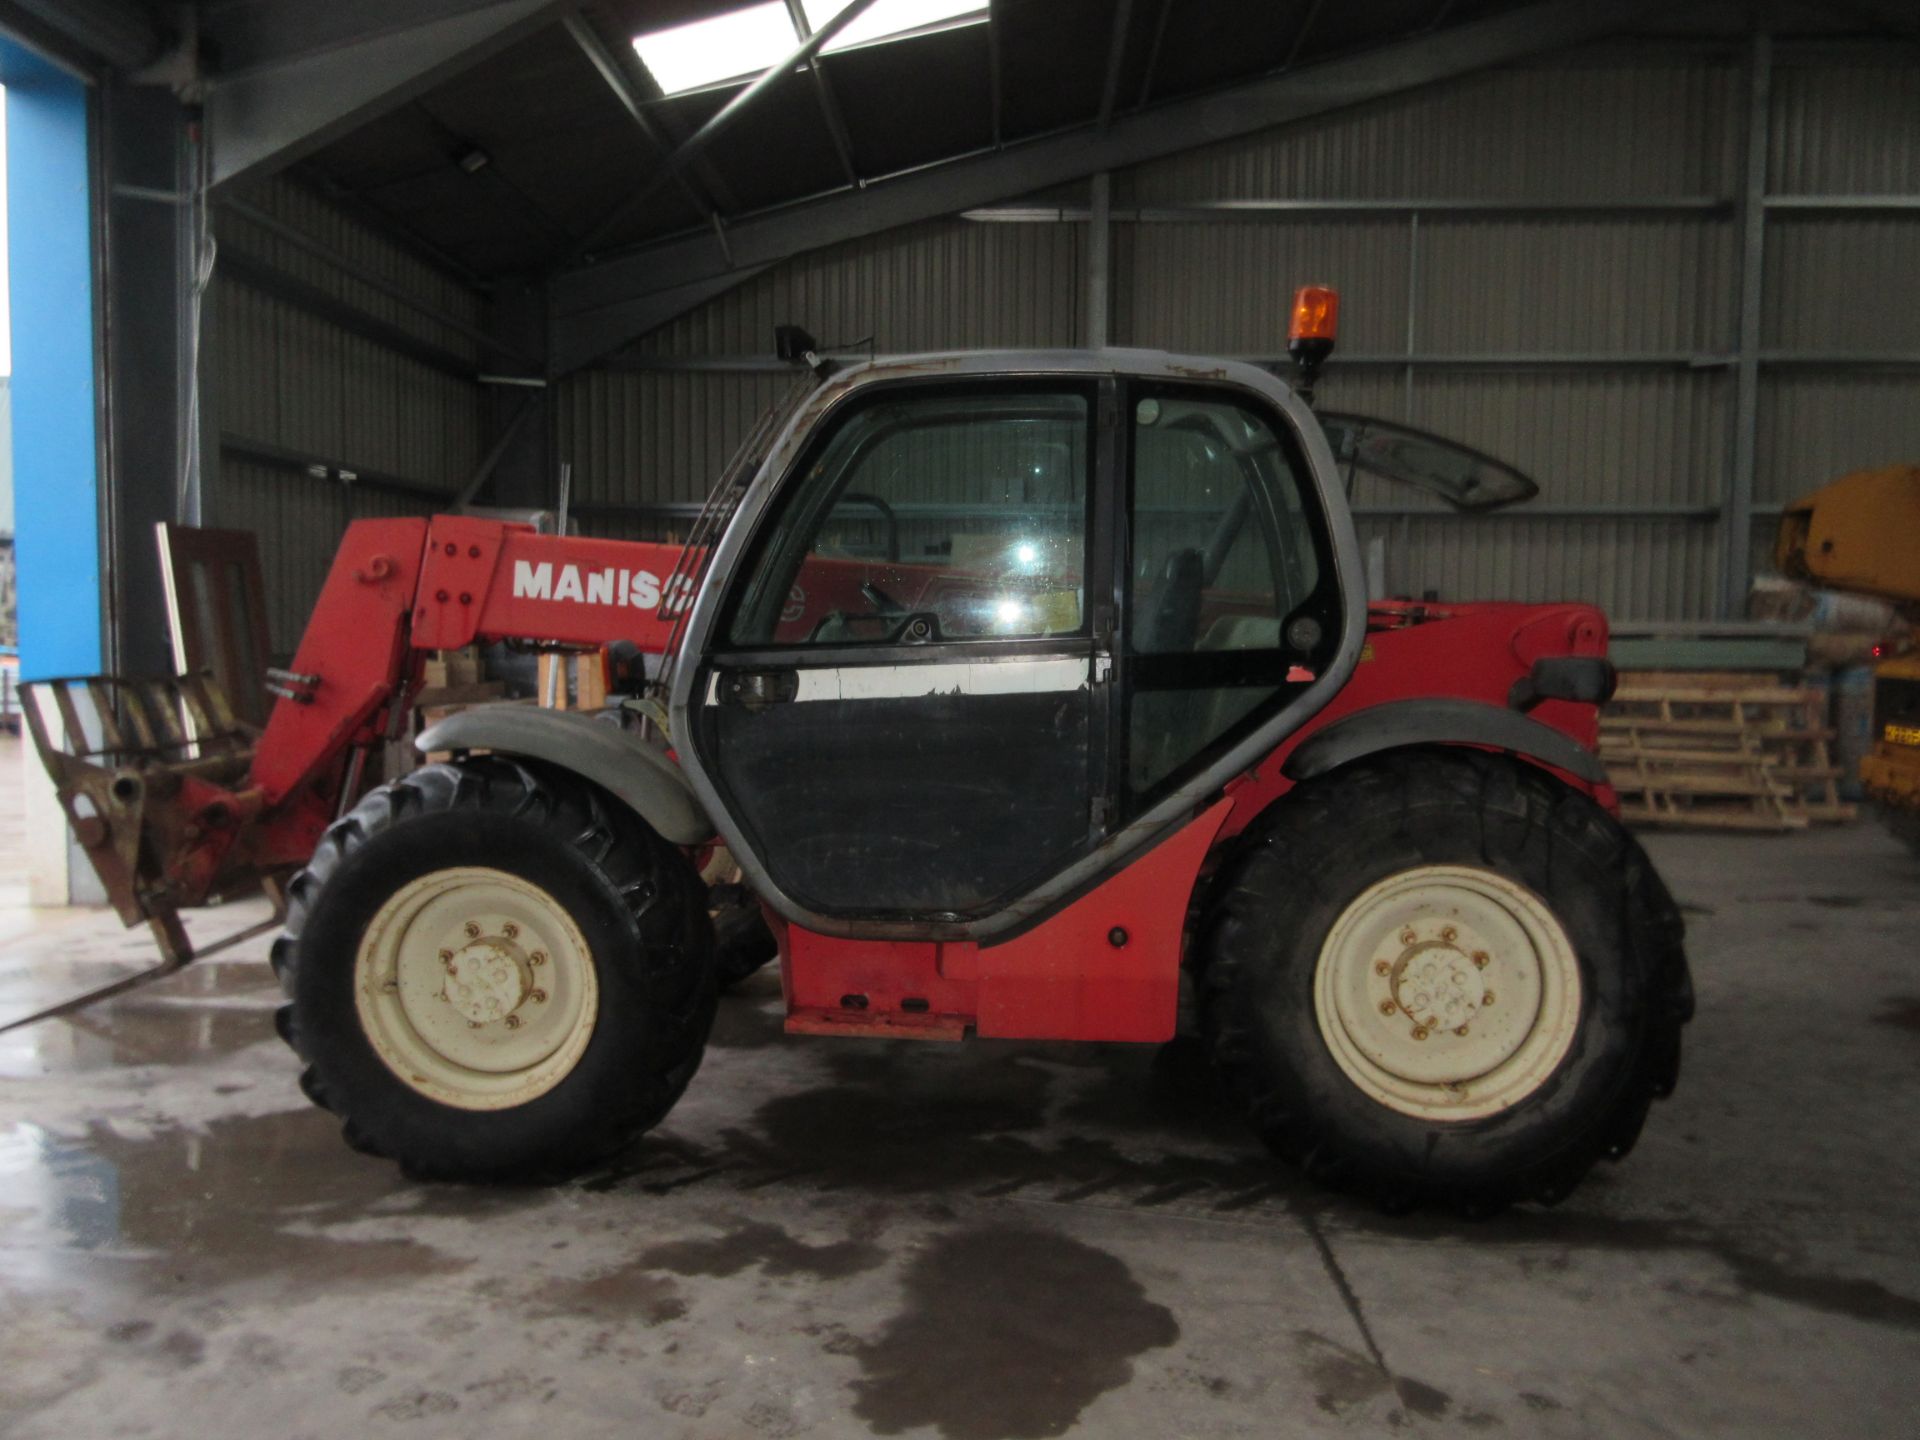 1 No. X853 NSS - Manitou MT732 Telehandler - 7m Reach - Date of 1st Registration 01/09/2000 - Image 2 of 5